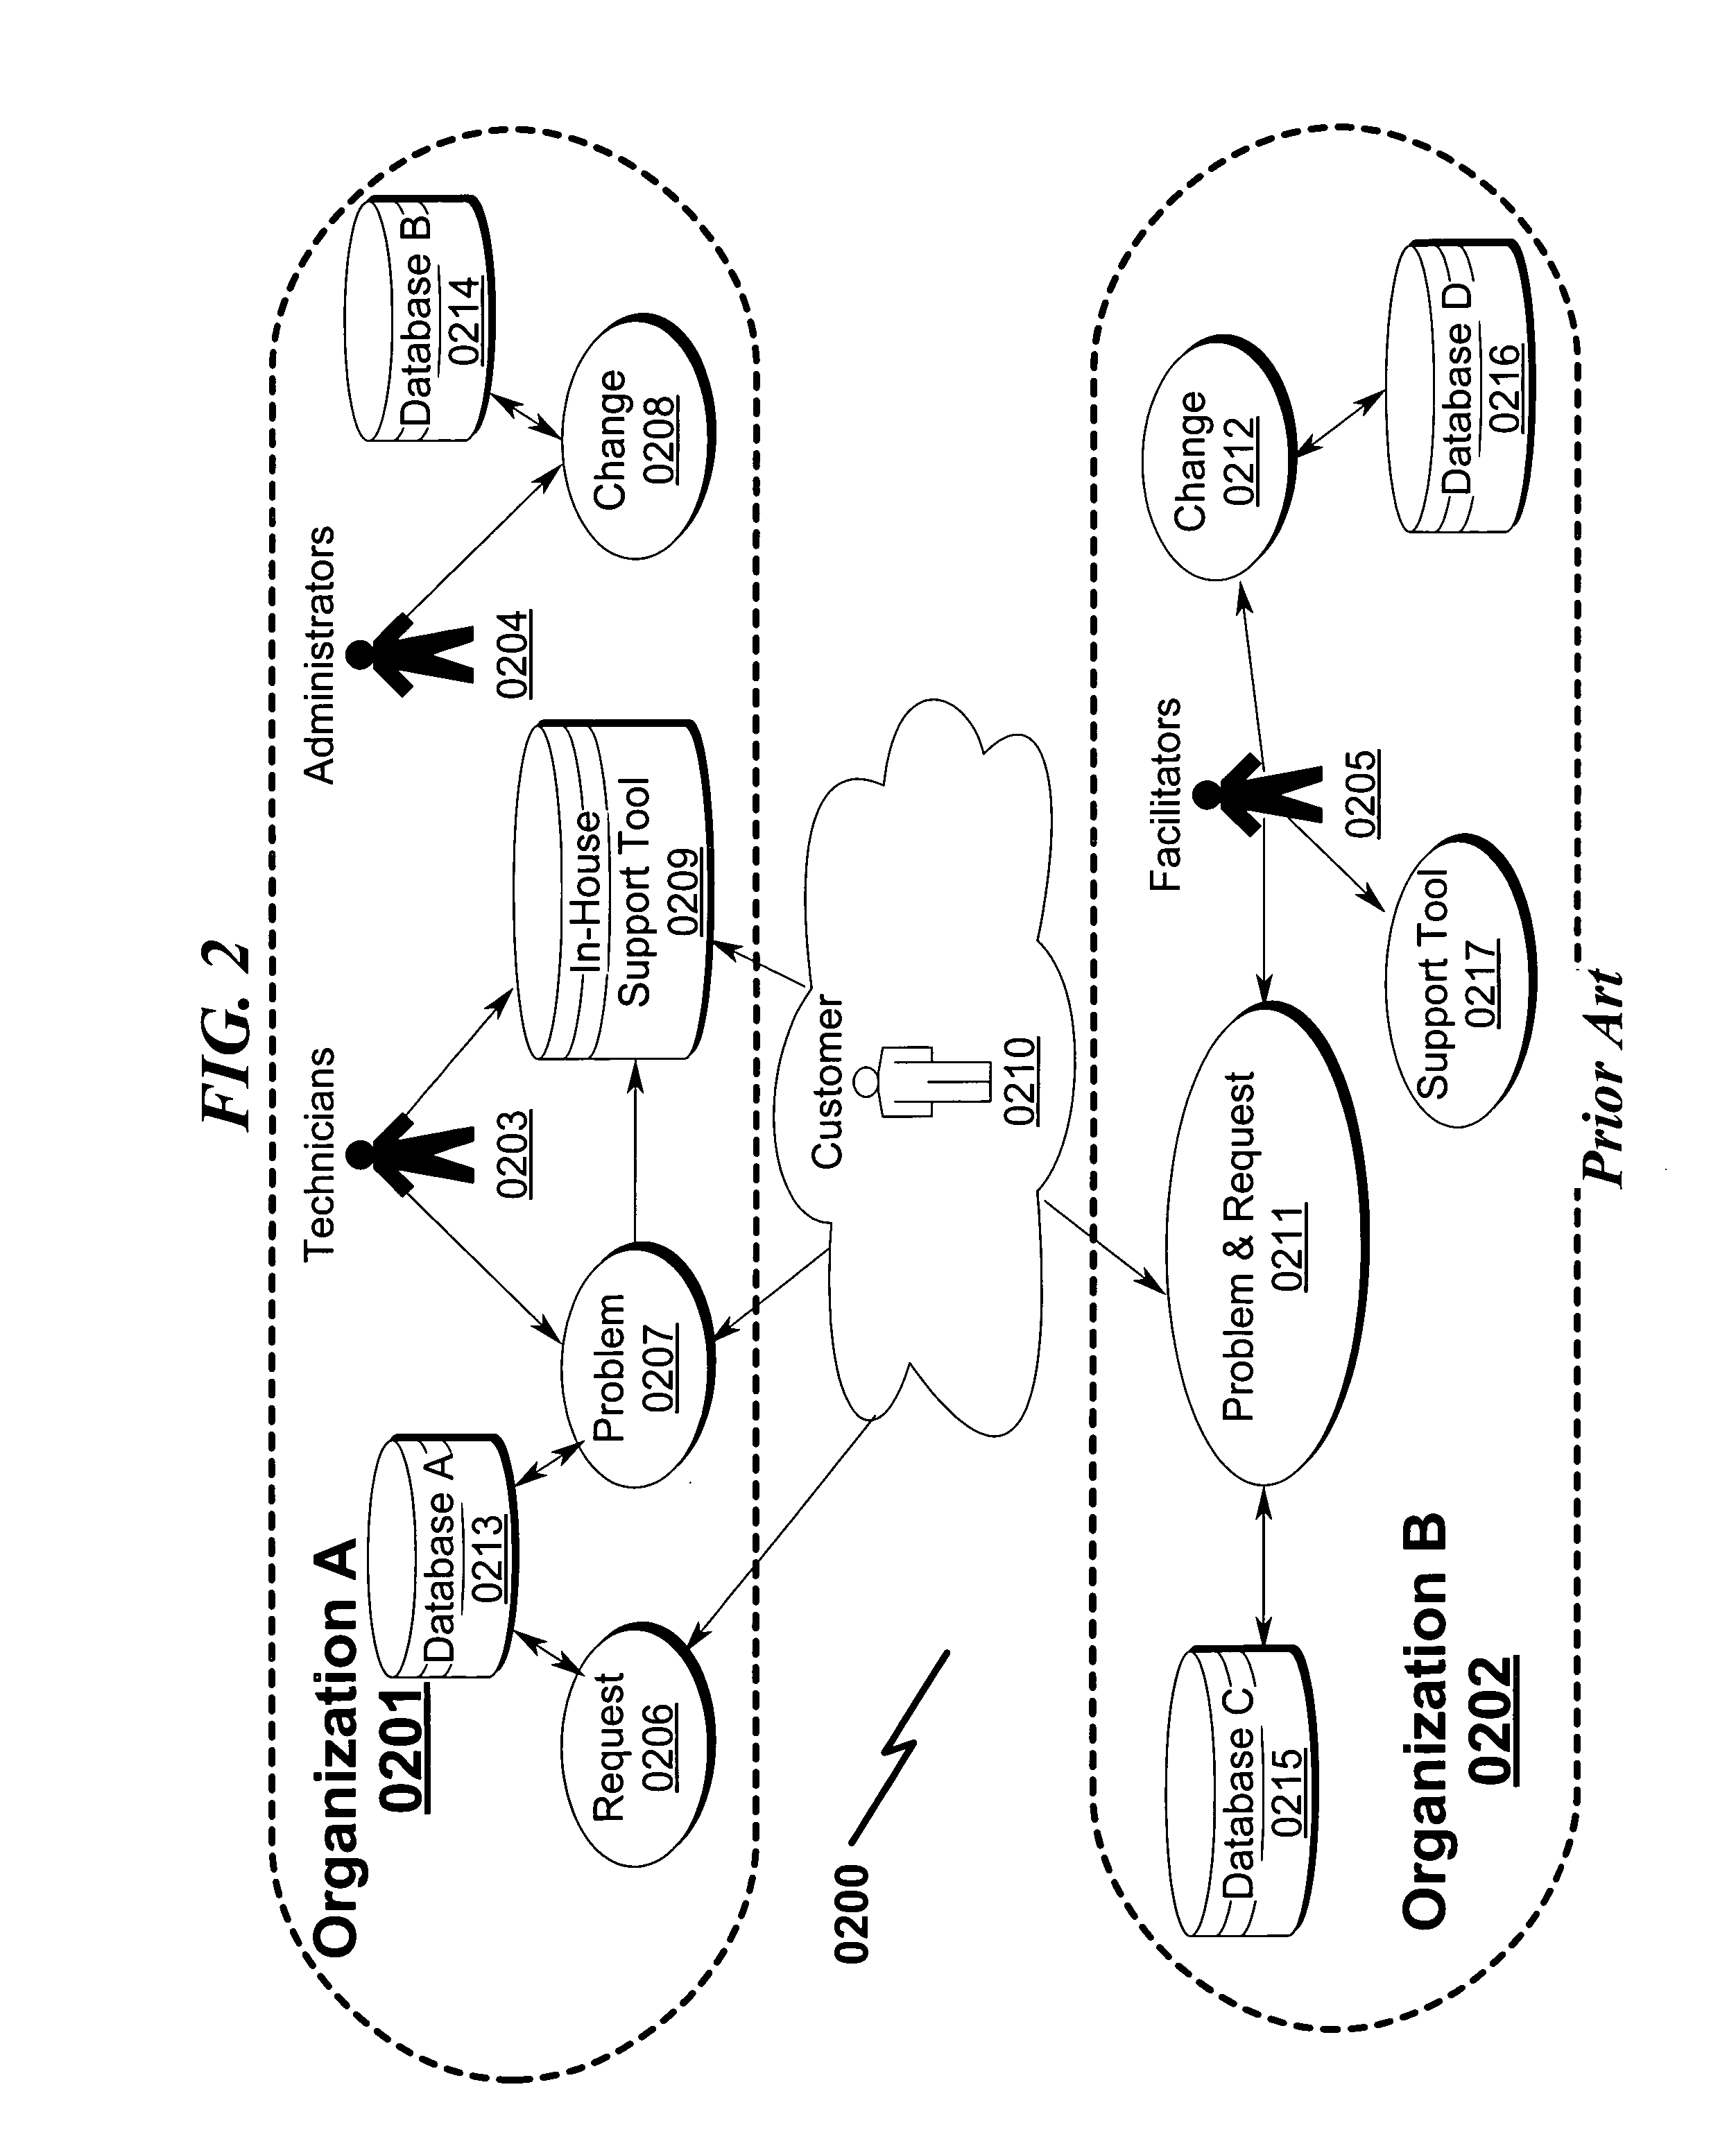 Integrated infrastructure operations management system and method